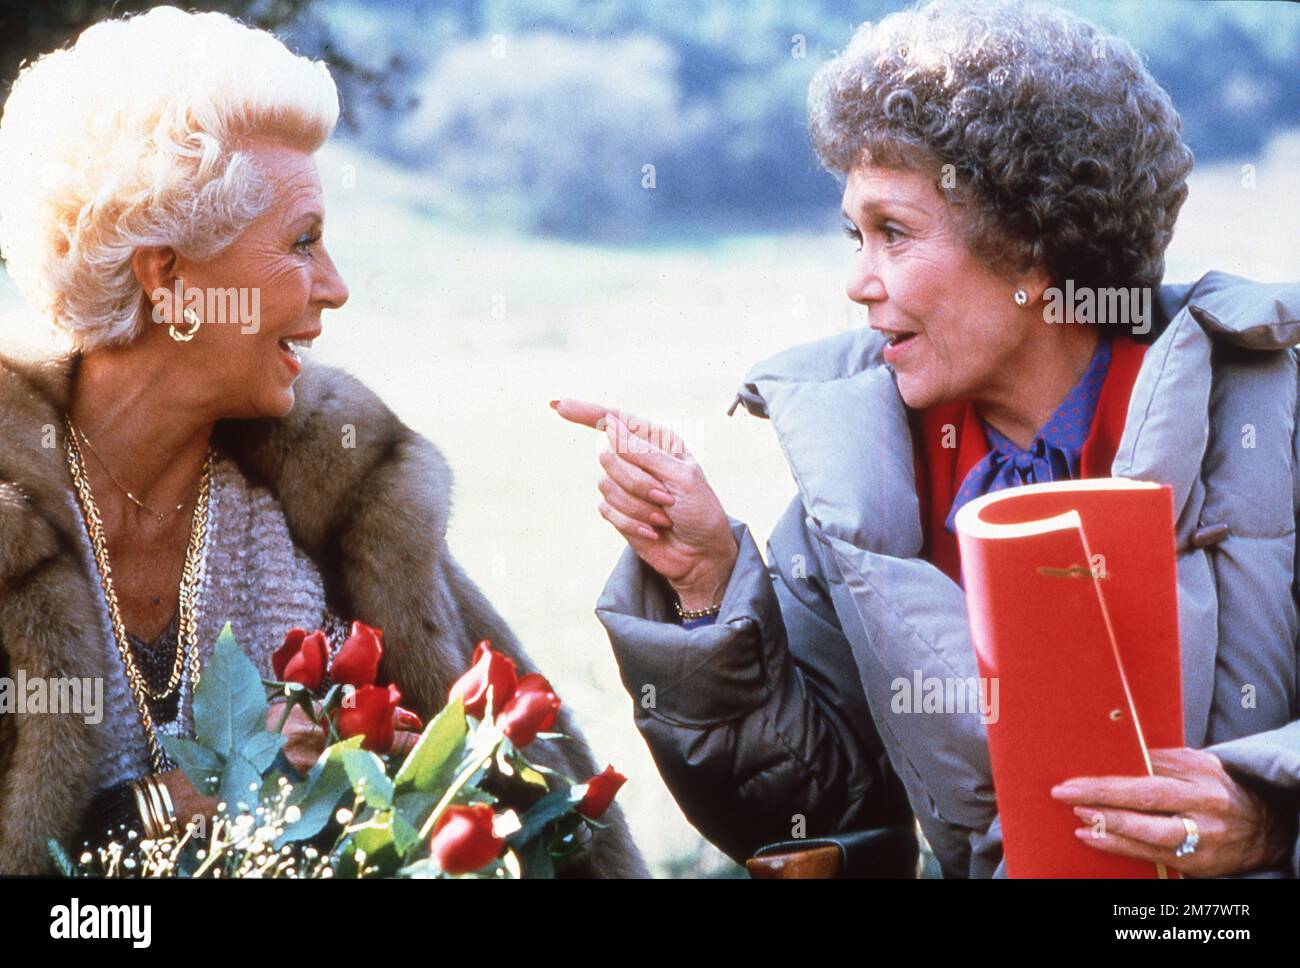 LANA TURNER and JANE WYMAN on set location candid at the start of filming of Lana Turner's 1st episode (of 6) FAMILY REUNION in the TV Series FALCON CREST created by EARL HAMNER Jr. aired on May 6th 1982 production companies Amanda & MF / Lorimar Productions publicity for CBS (Columbia Broadcasting System) Stock Photo